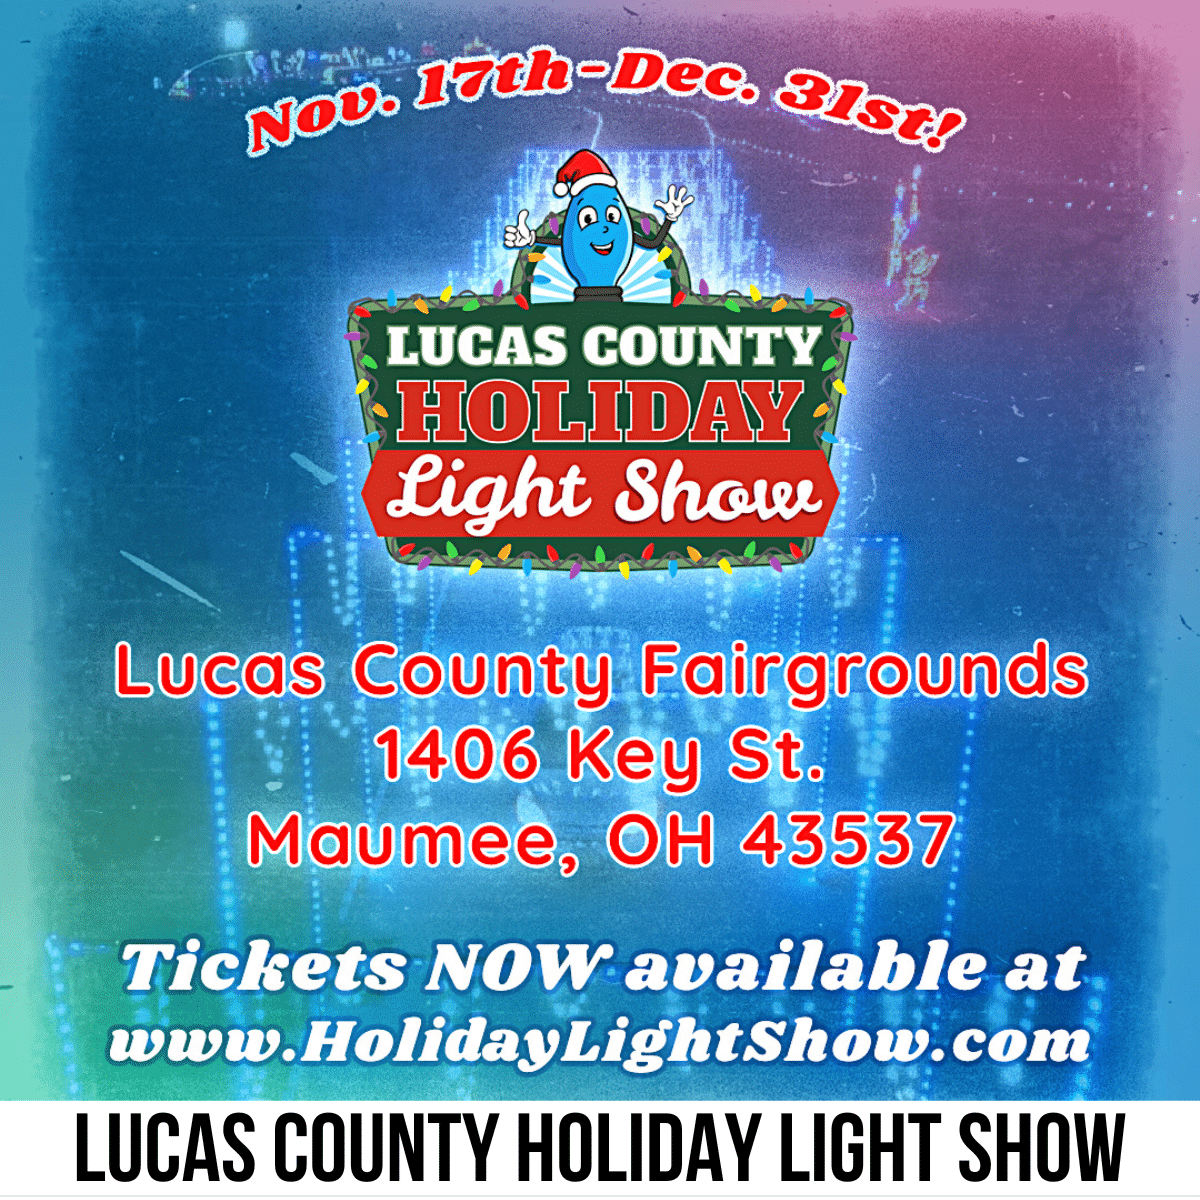 square image with a promotional graphic for the Lucas County Holiday Light Show